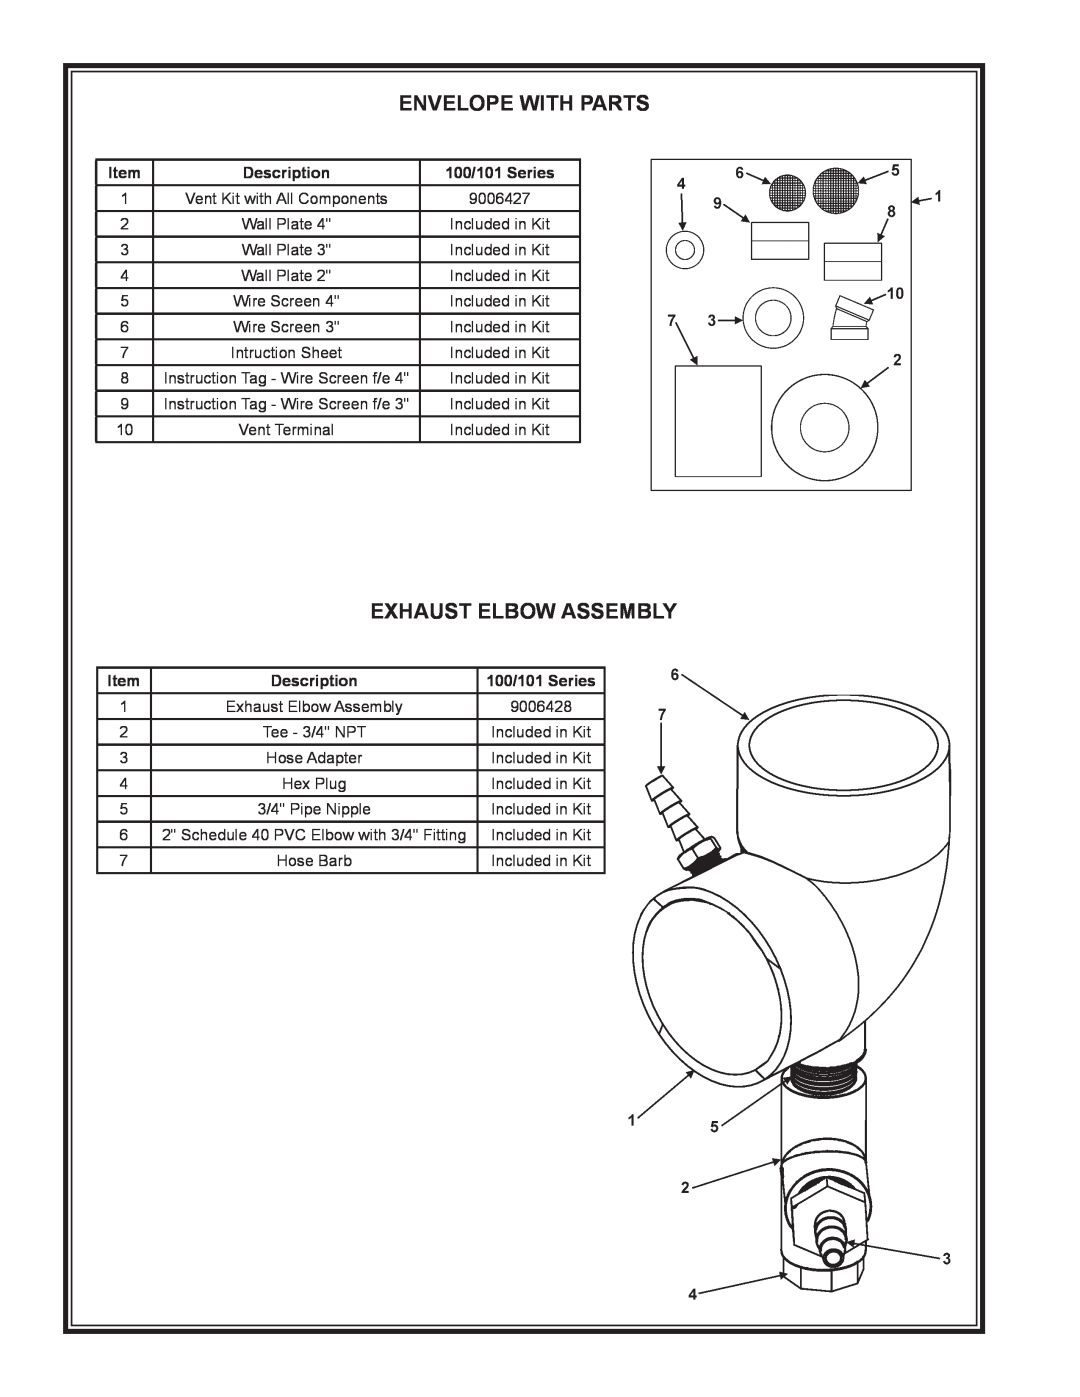 A.O. Smith GDHE-50 manual Exhaust Elbow Assembly, Wire Screen, Tee - 3/4 NPT, Hex Plug, Envelope With Parts, Description 